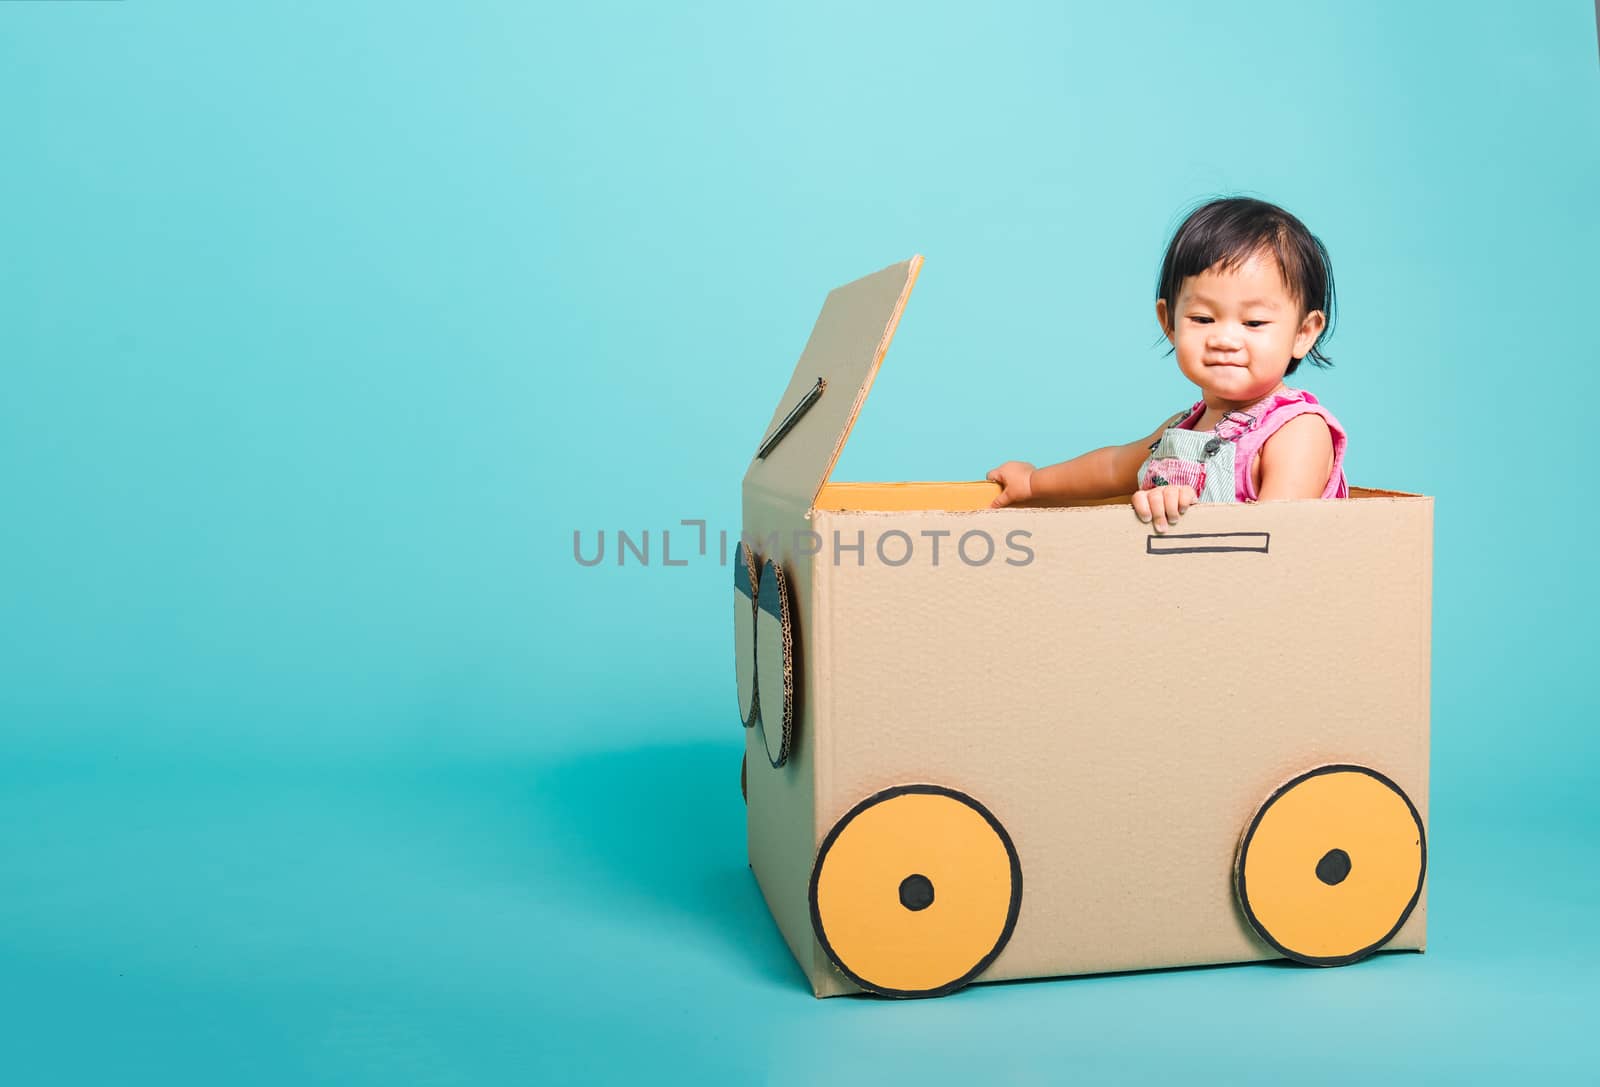 Happy Asian Baby girl smile in driving play car creative by a cardboard box imagination, summer holiday travel concept, studio shot on blue background with copy space for text